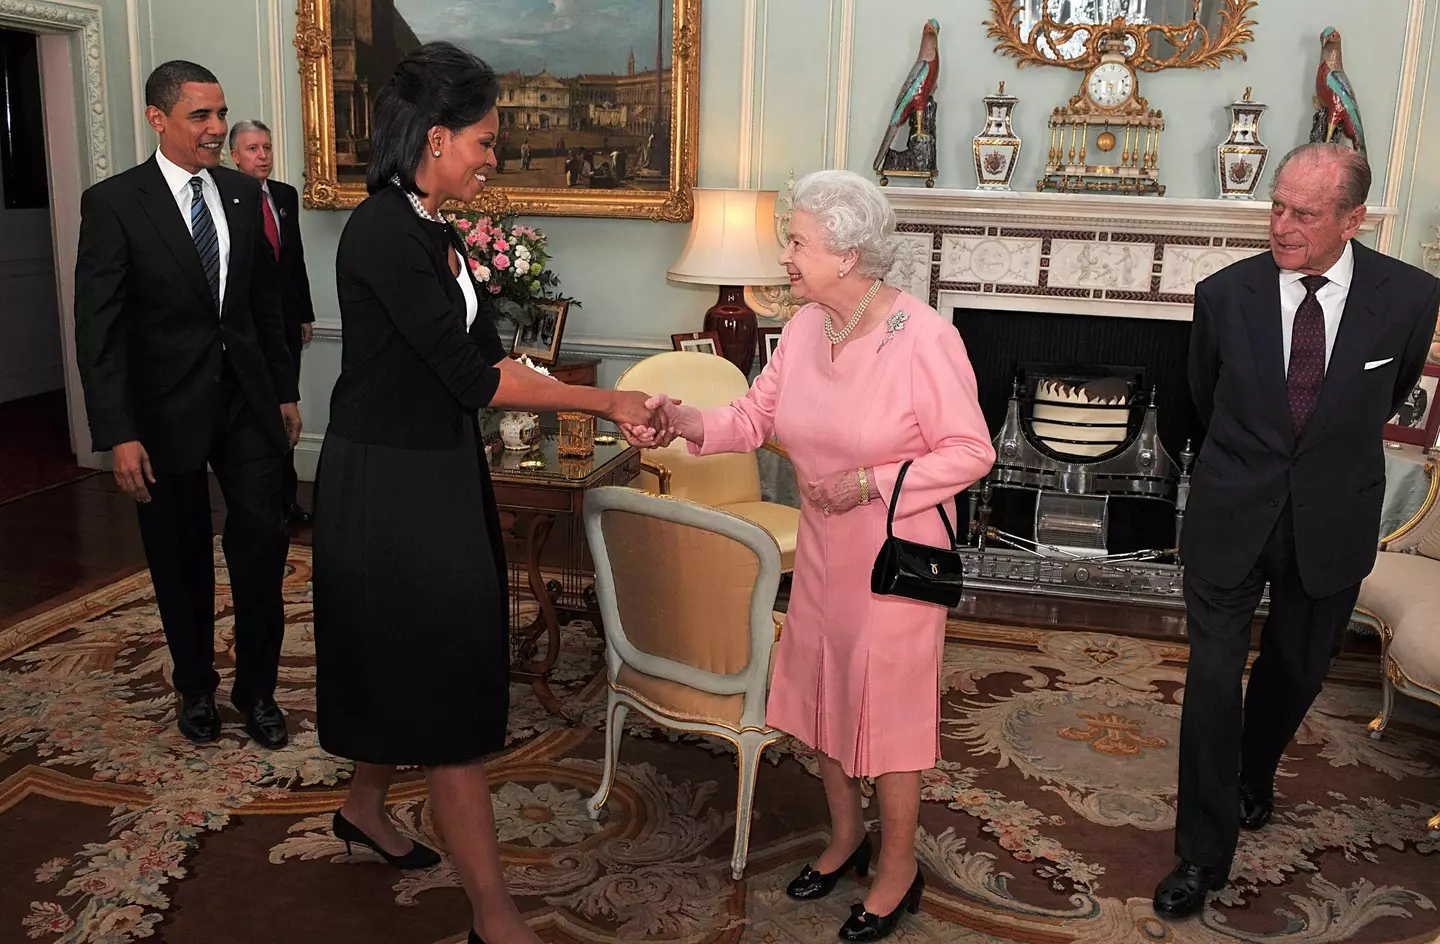 Michelle Obama has met the Queen multiple times. (John Stillwell/AFP via Getty Images)